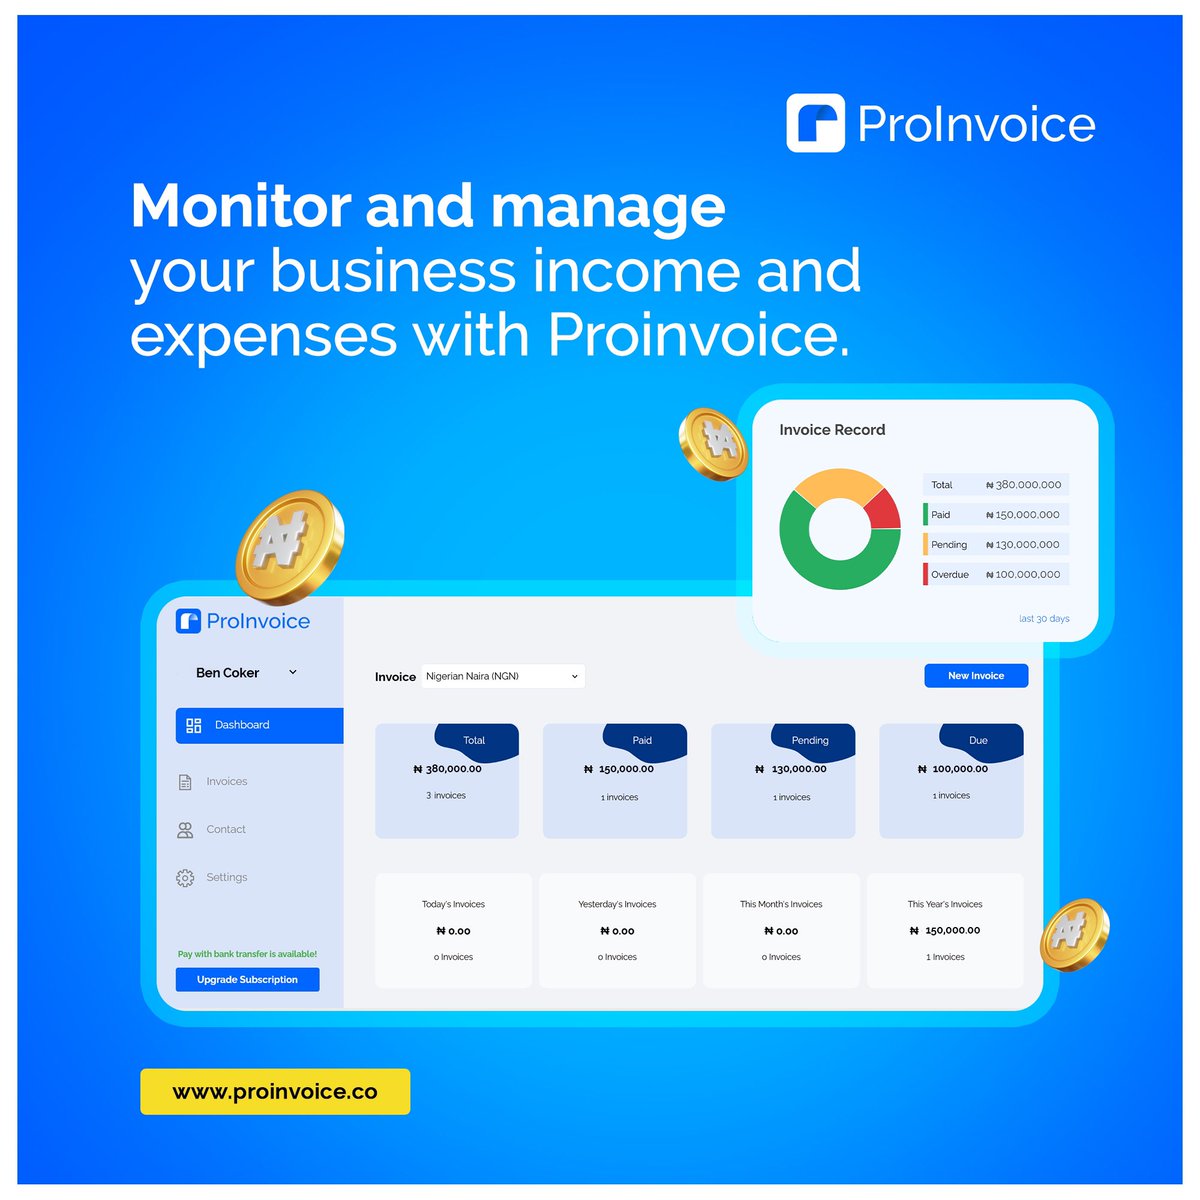 One of ProInvoice's capabilities allows you to automatically manage your clients' invoices and issue reminders when payments are due.
It saves you time and effort in your business with just one click, allowing you to concentrate on expanding it.

#freeinvoices #invoicegenerator